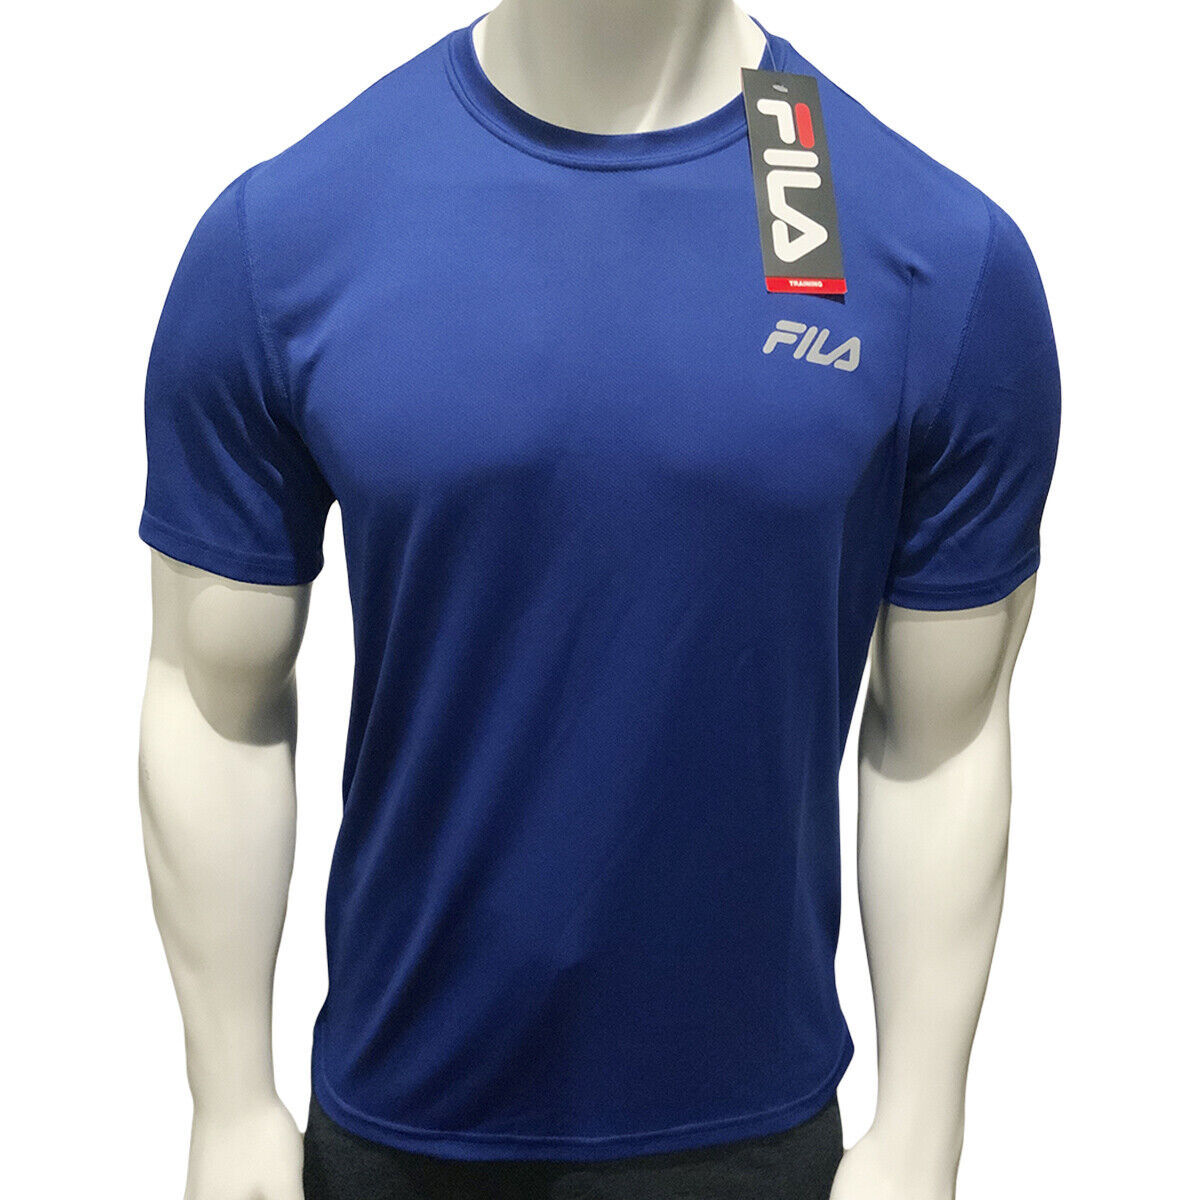 Primary image for NWT FILA MSRP $32.99 MEN BLUE CREW NECK SHORT SLEEVE TRAINING T-SHIRT SIZE L 2XL